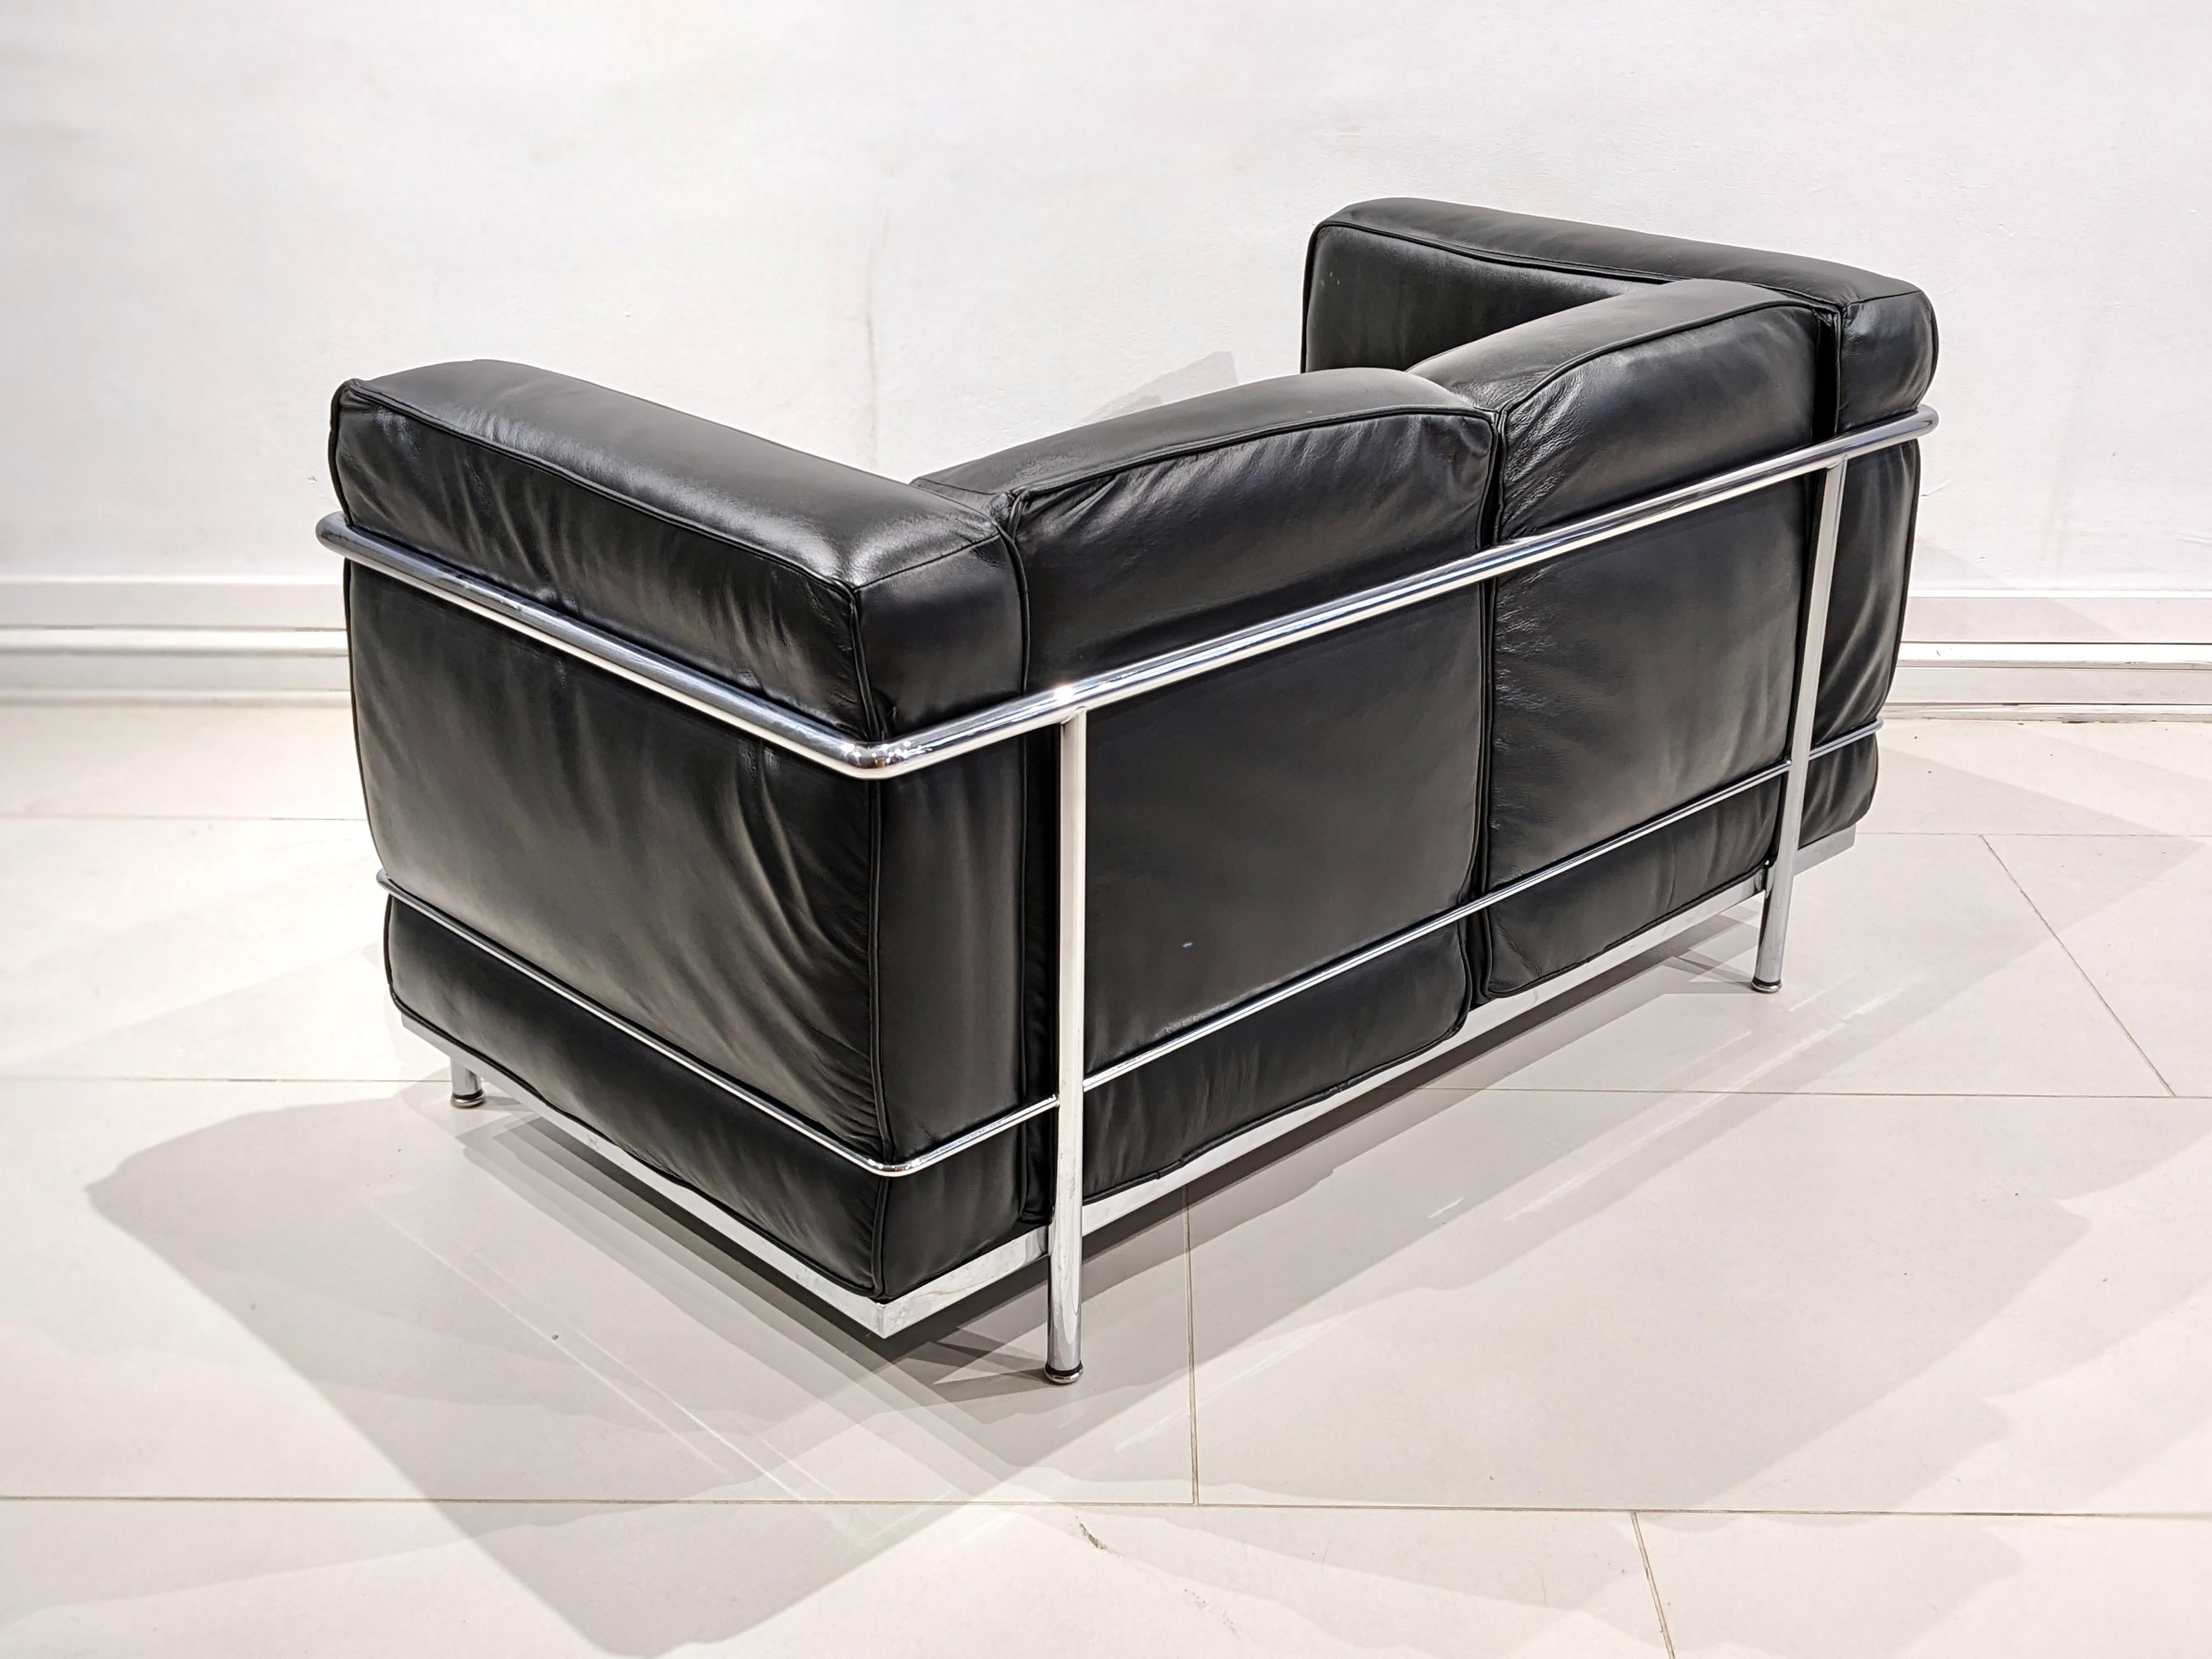 LC2 sofa signed Le Corbusier Cassina edition.
Circa 2000 
Very good condition. 
Black leather and chromed metal base.
The sofa is signed and has a serial number 109211 (see picture). 
Dimensions : L 130 cm x D 70 cm x H 68 cm.